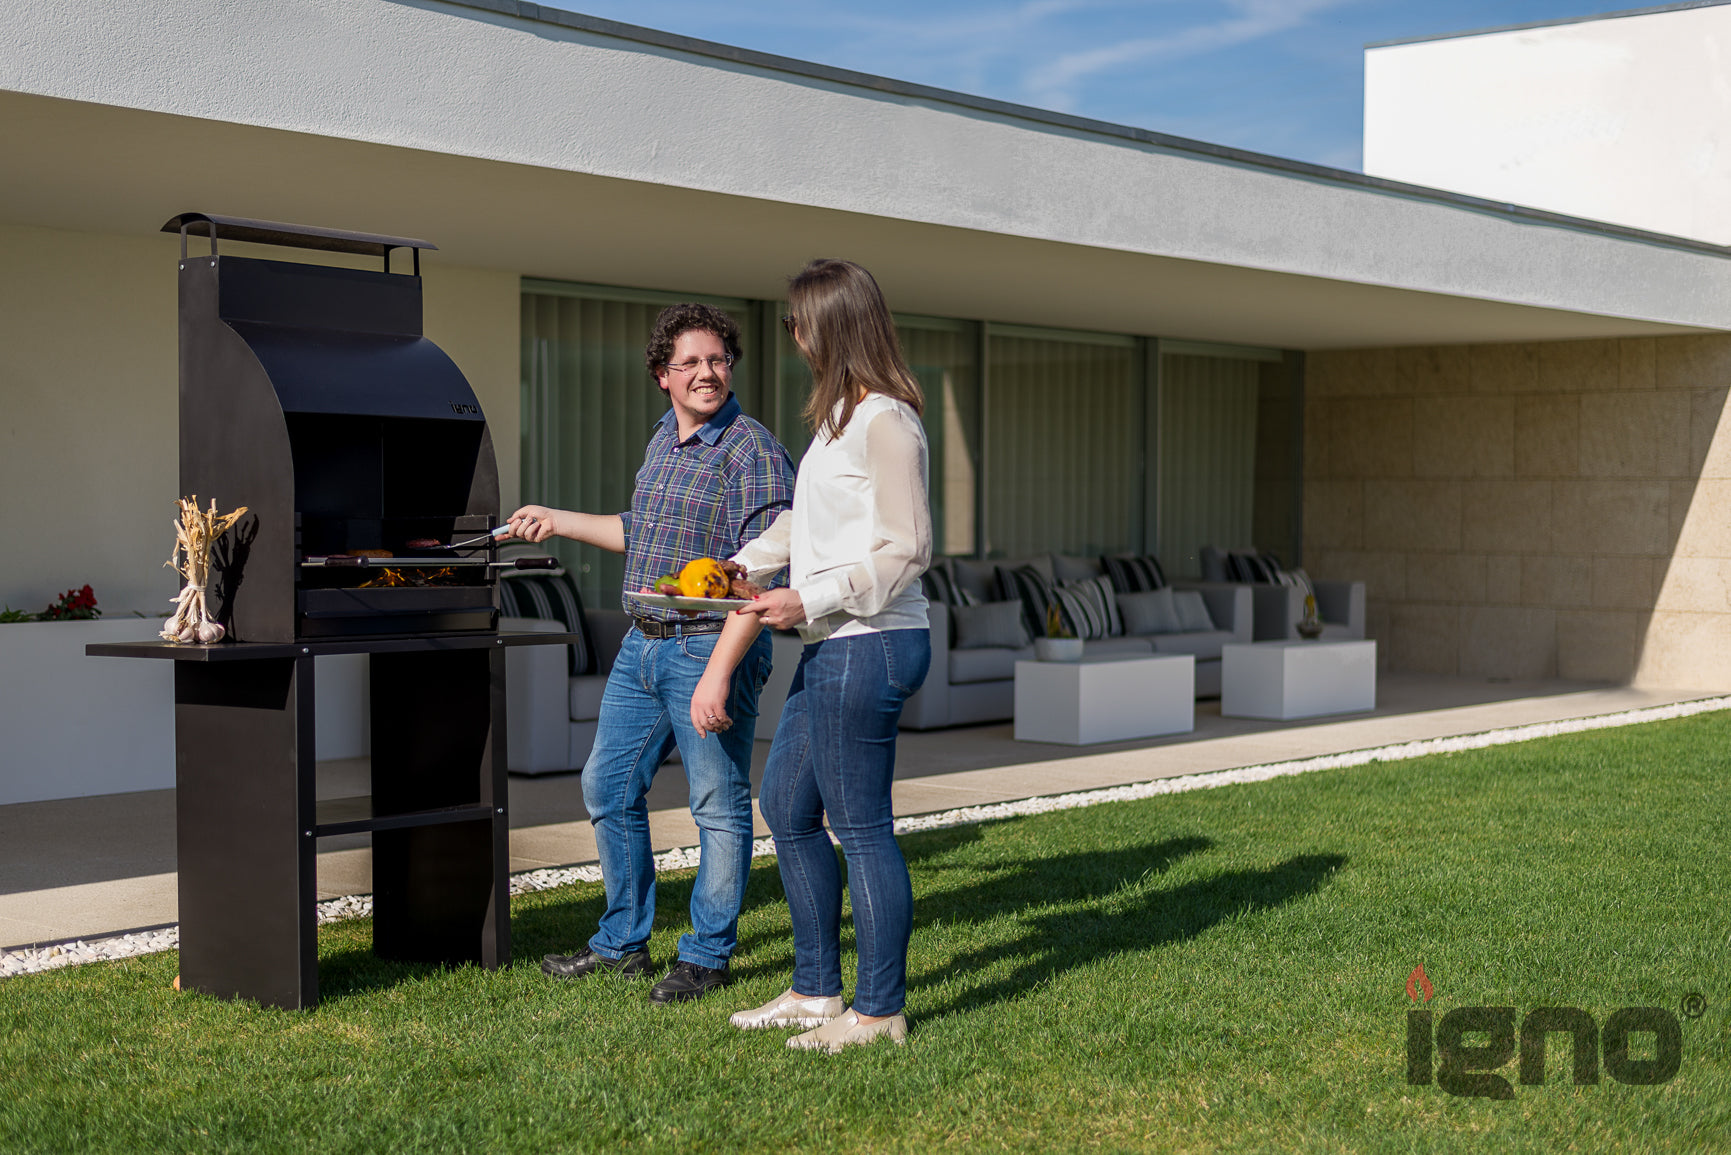 Metalic barbecue with bench